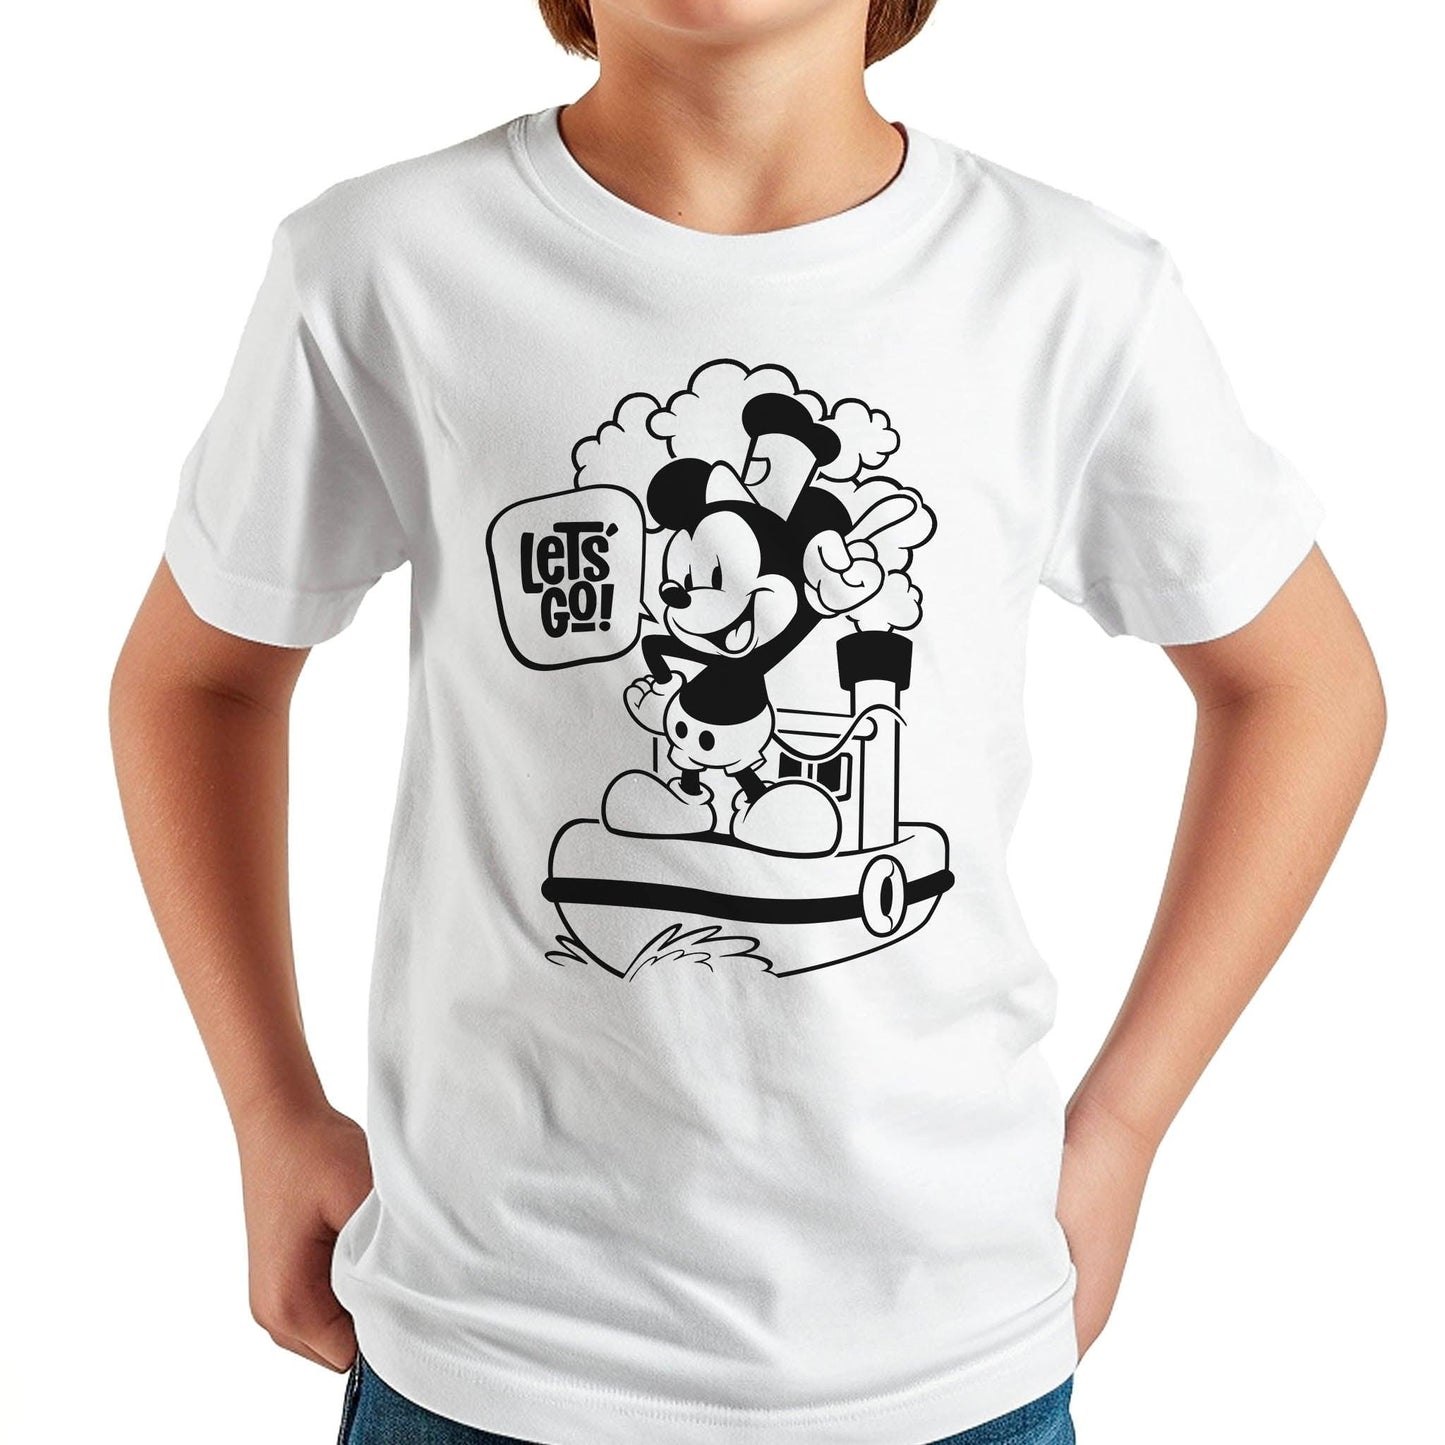 Let's Go! Youth Tee - Steamboat Willie World